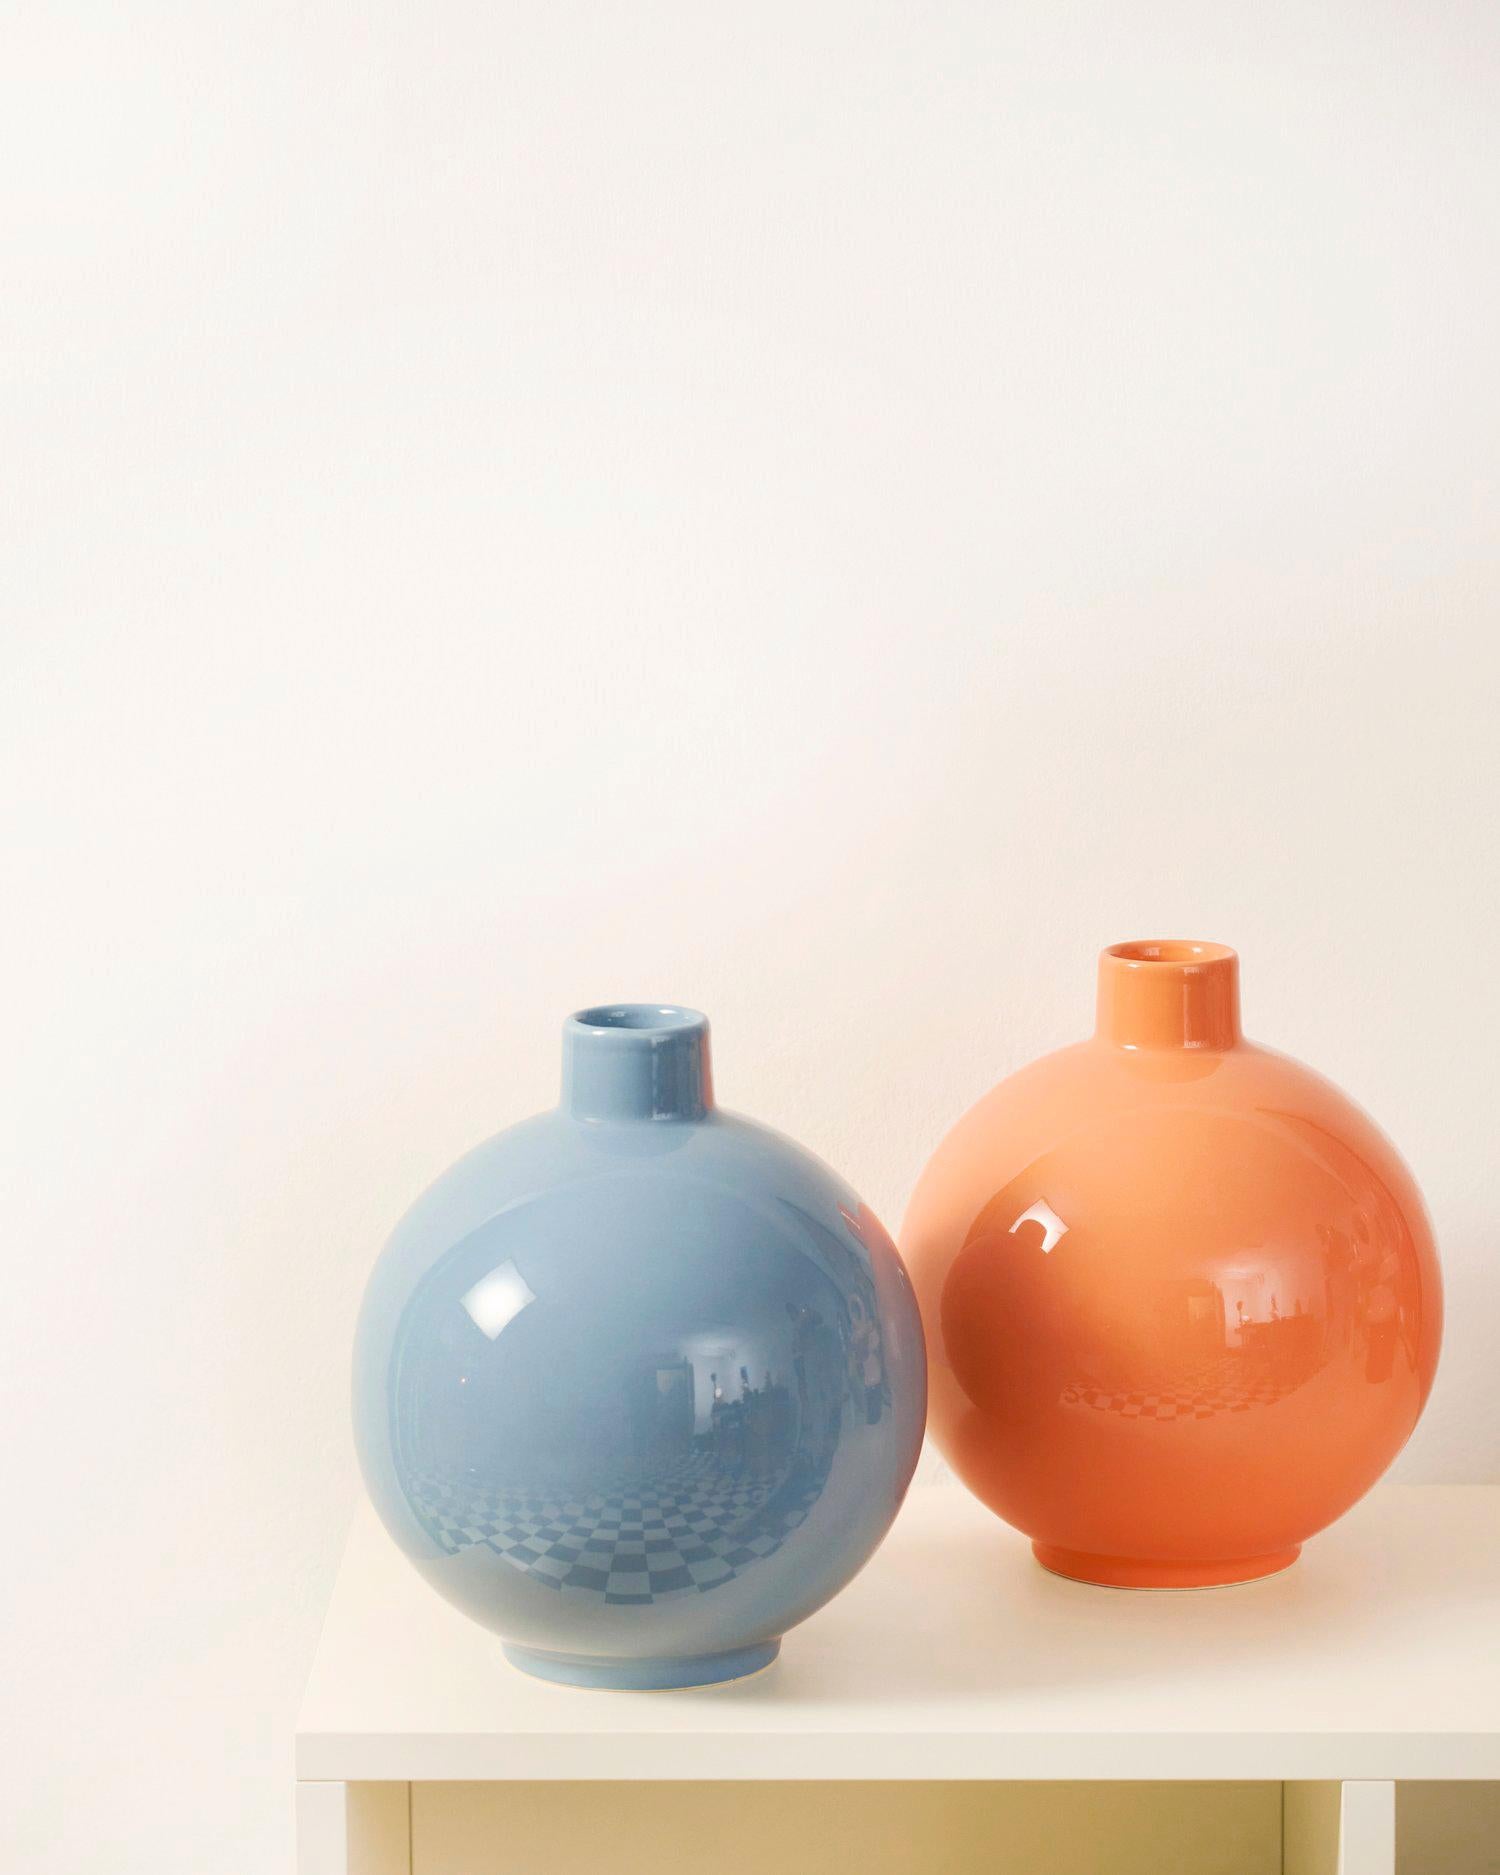 IRENA has a simple, compact spherical shape with a short cylindrical neck. The vase is made of noble ceramics and, in its classic and fully functional form, is an artistic addition to interior design. 